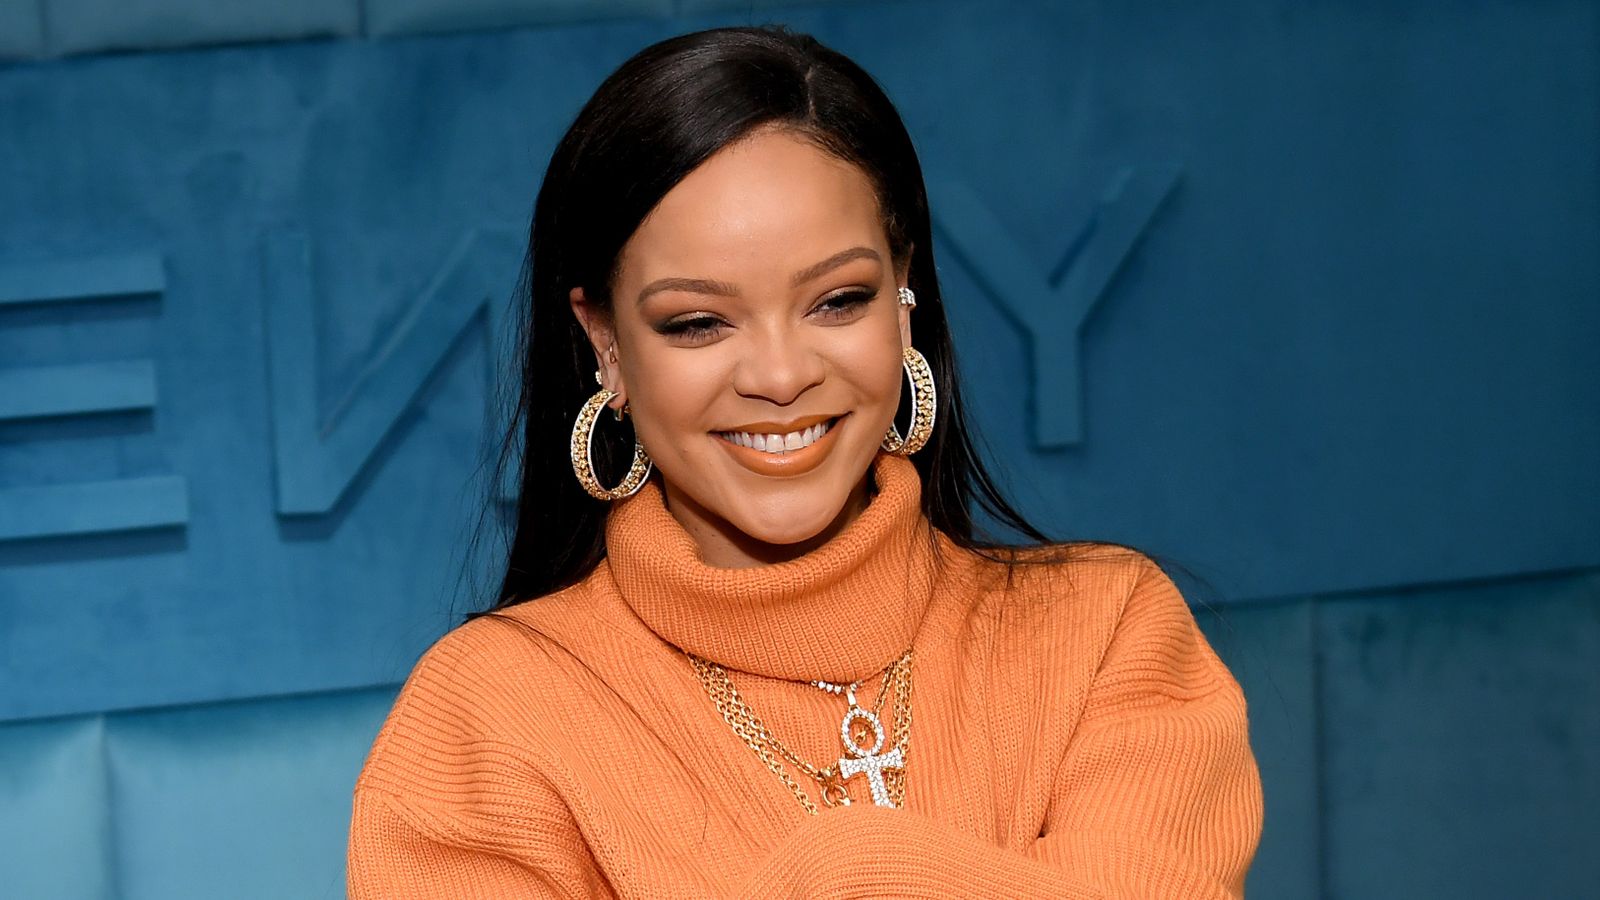 Rihanna was injured in an electric motorcycle accident |  Ents & Arts News